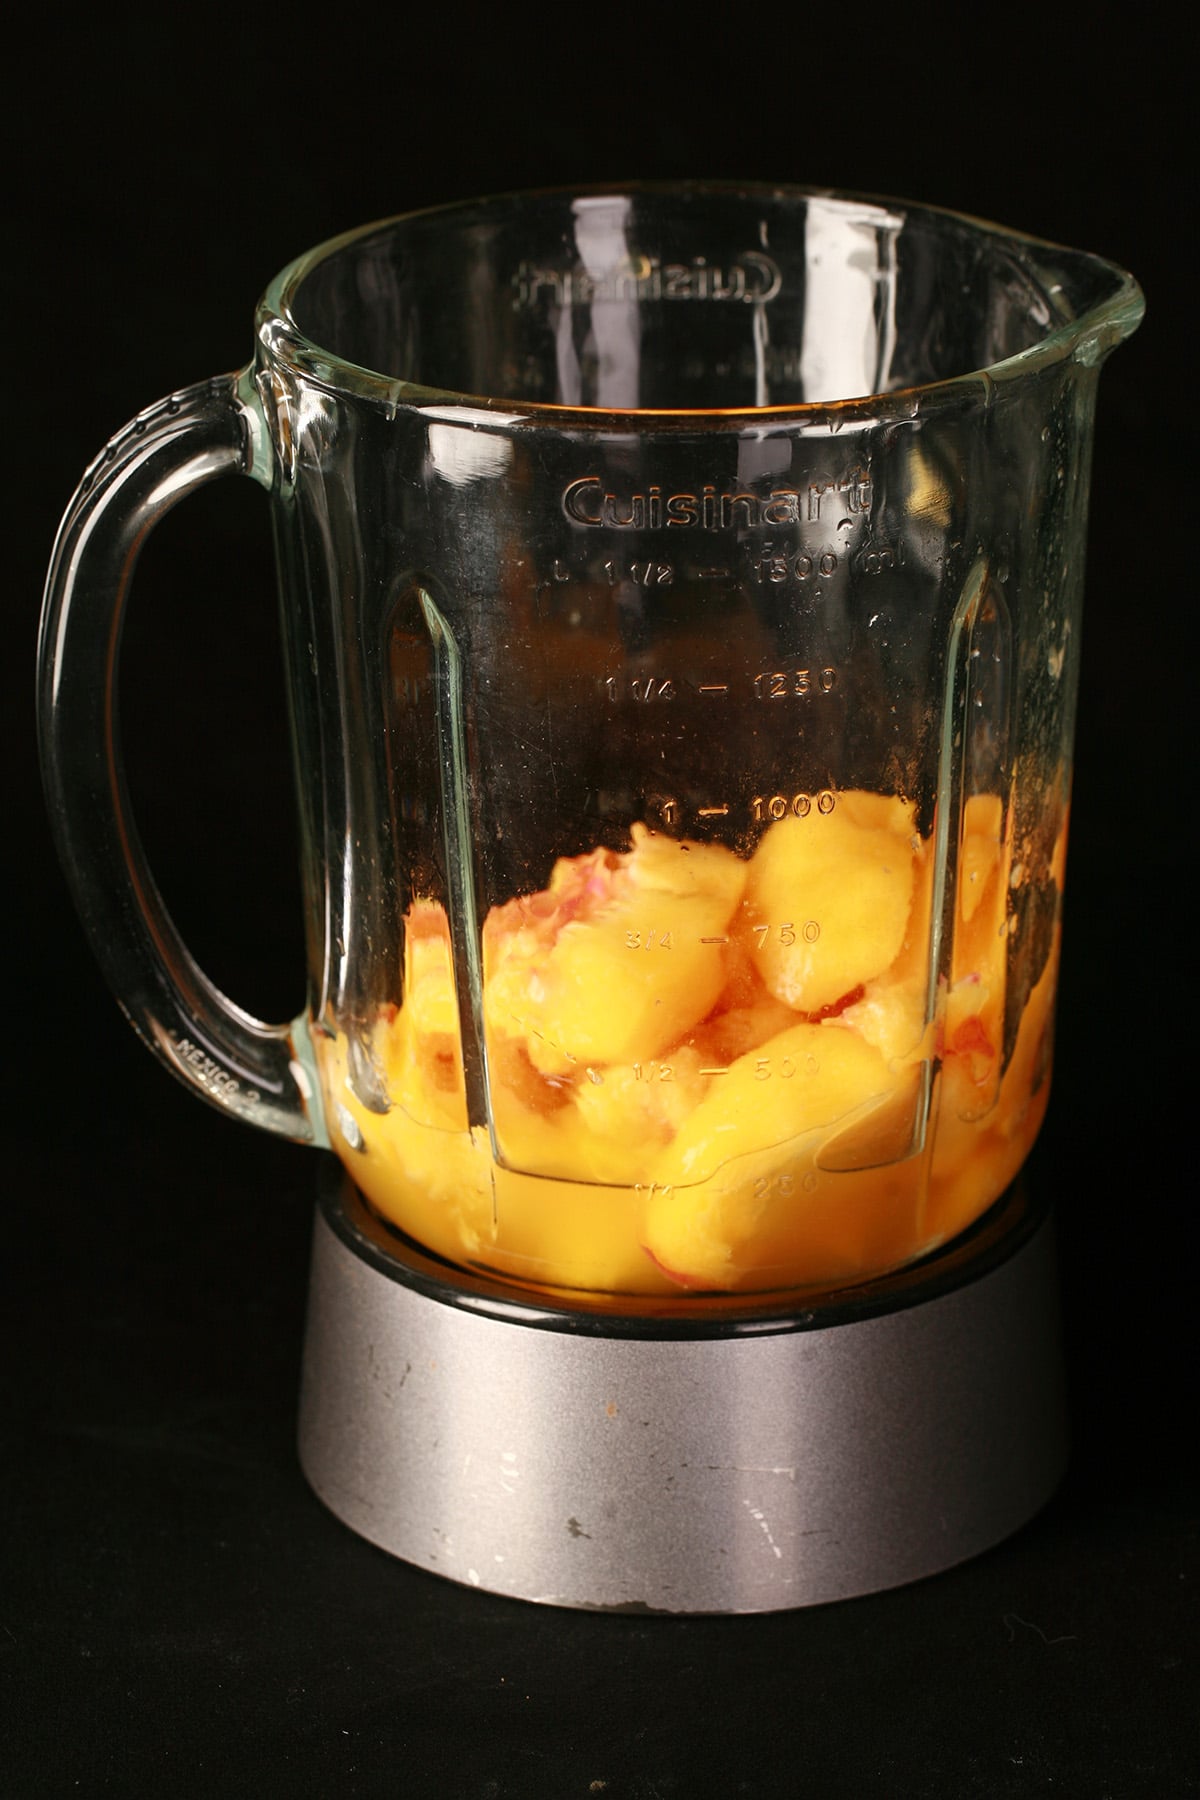 A blender with peach chunks in it, against a black background.